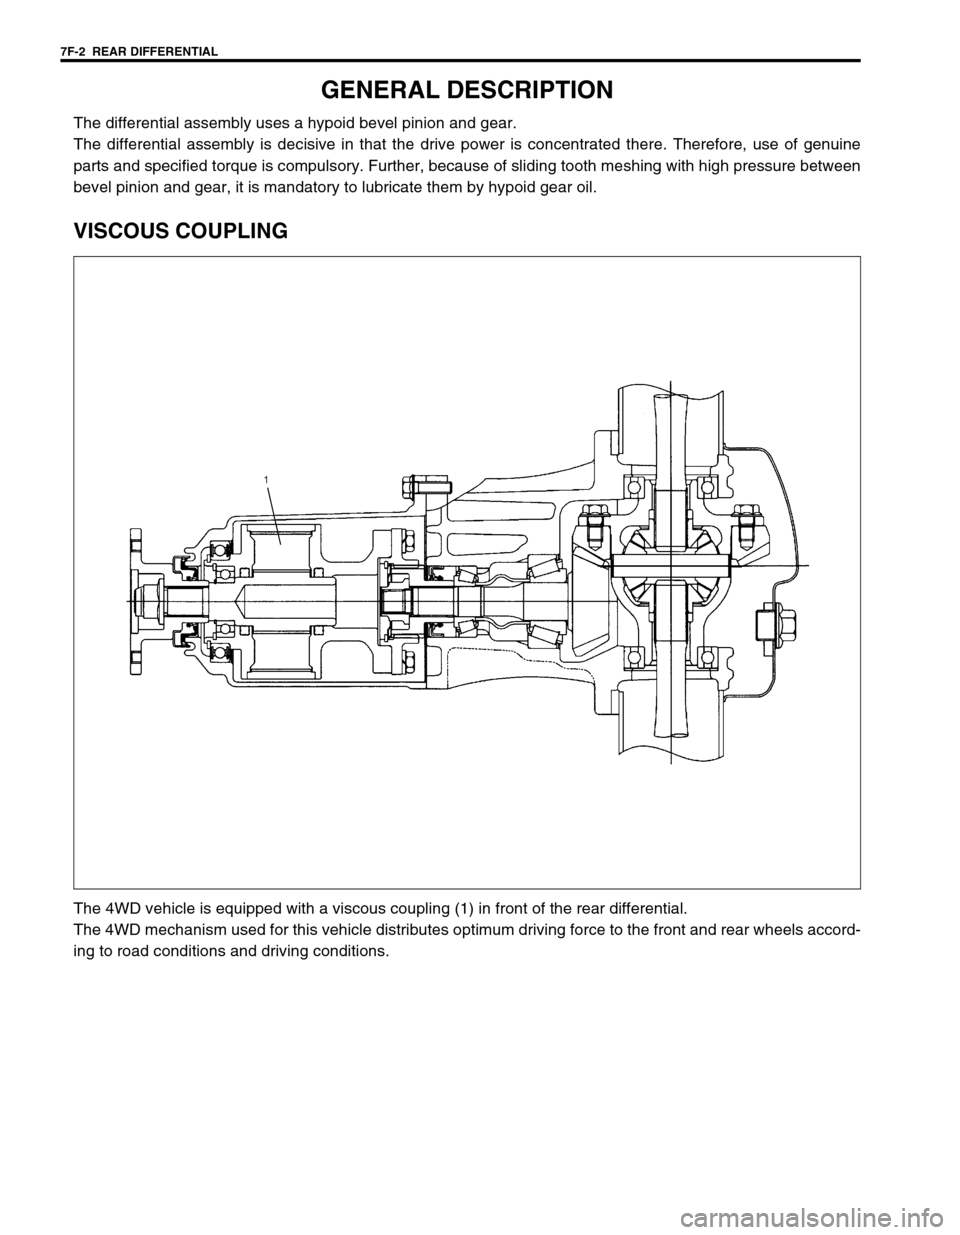 SUZUKI SWIFT 2000 1.G Transmission Service Workshop Manual 7F-2  REAR DIFFERENTIAL
GENERAL DESCRIPTION
The differential assembly uses a hypoid bevel pinion and gear.
The differential assembly is decisive in that the drive power is concentrated there. Therefor